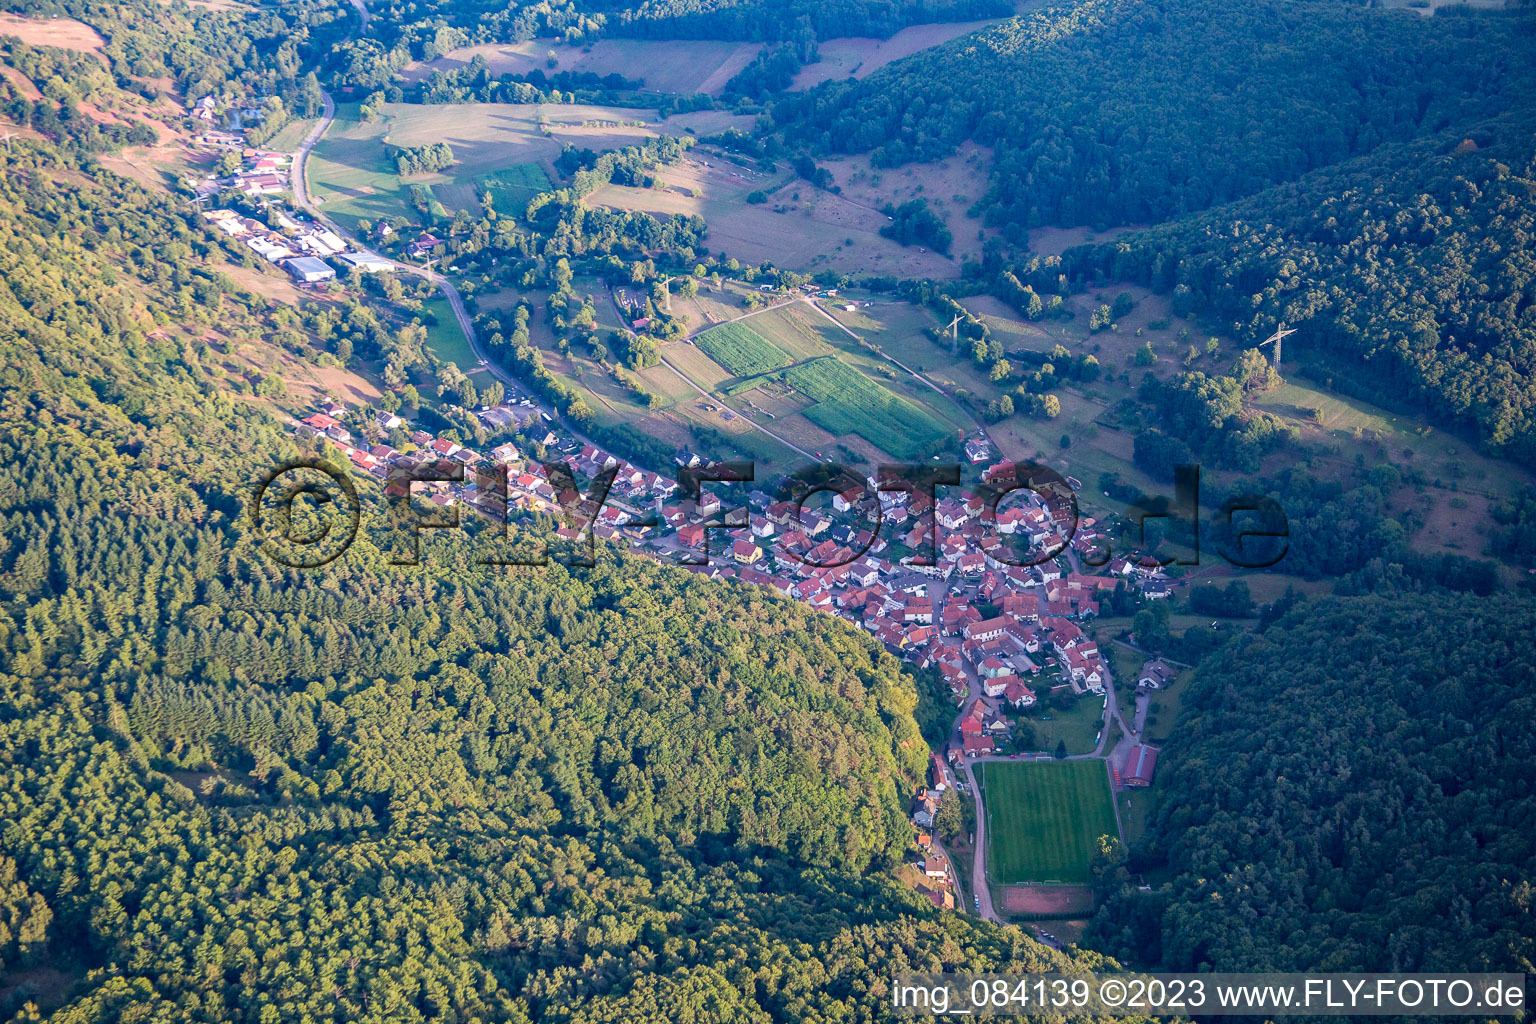 Drone recording of Eußerthal in the state Rhineland-Palatinate, Germany